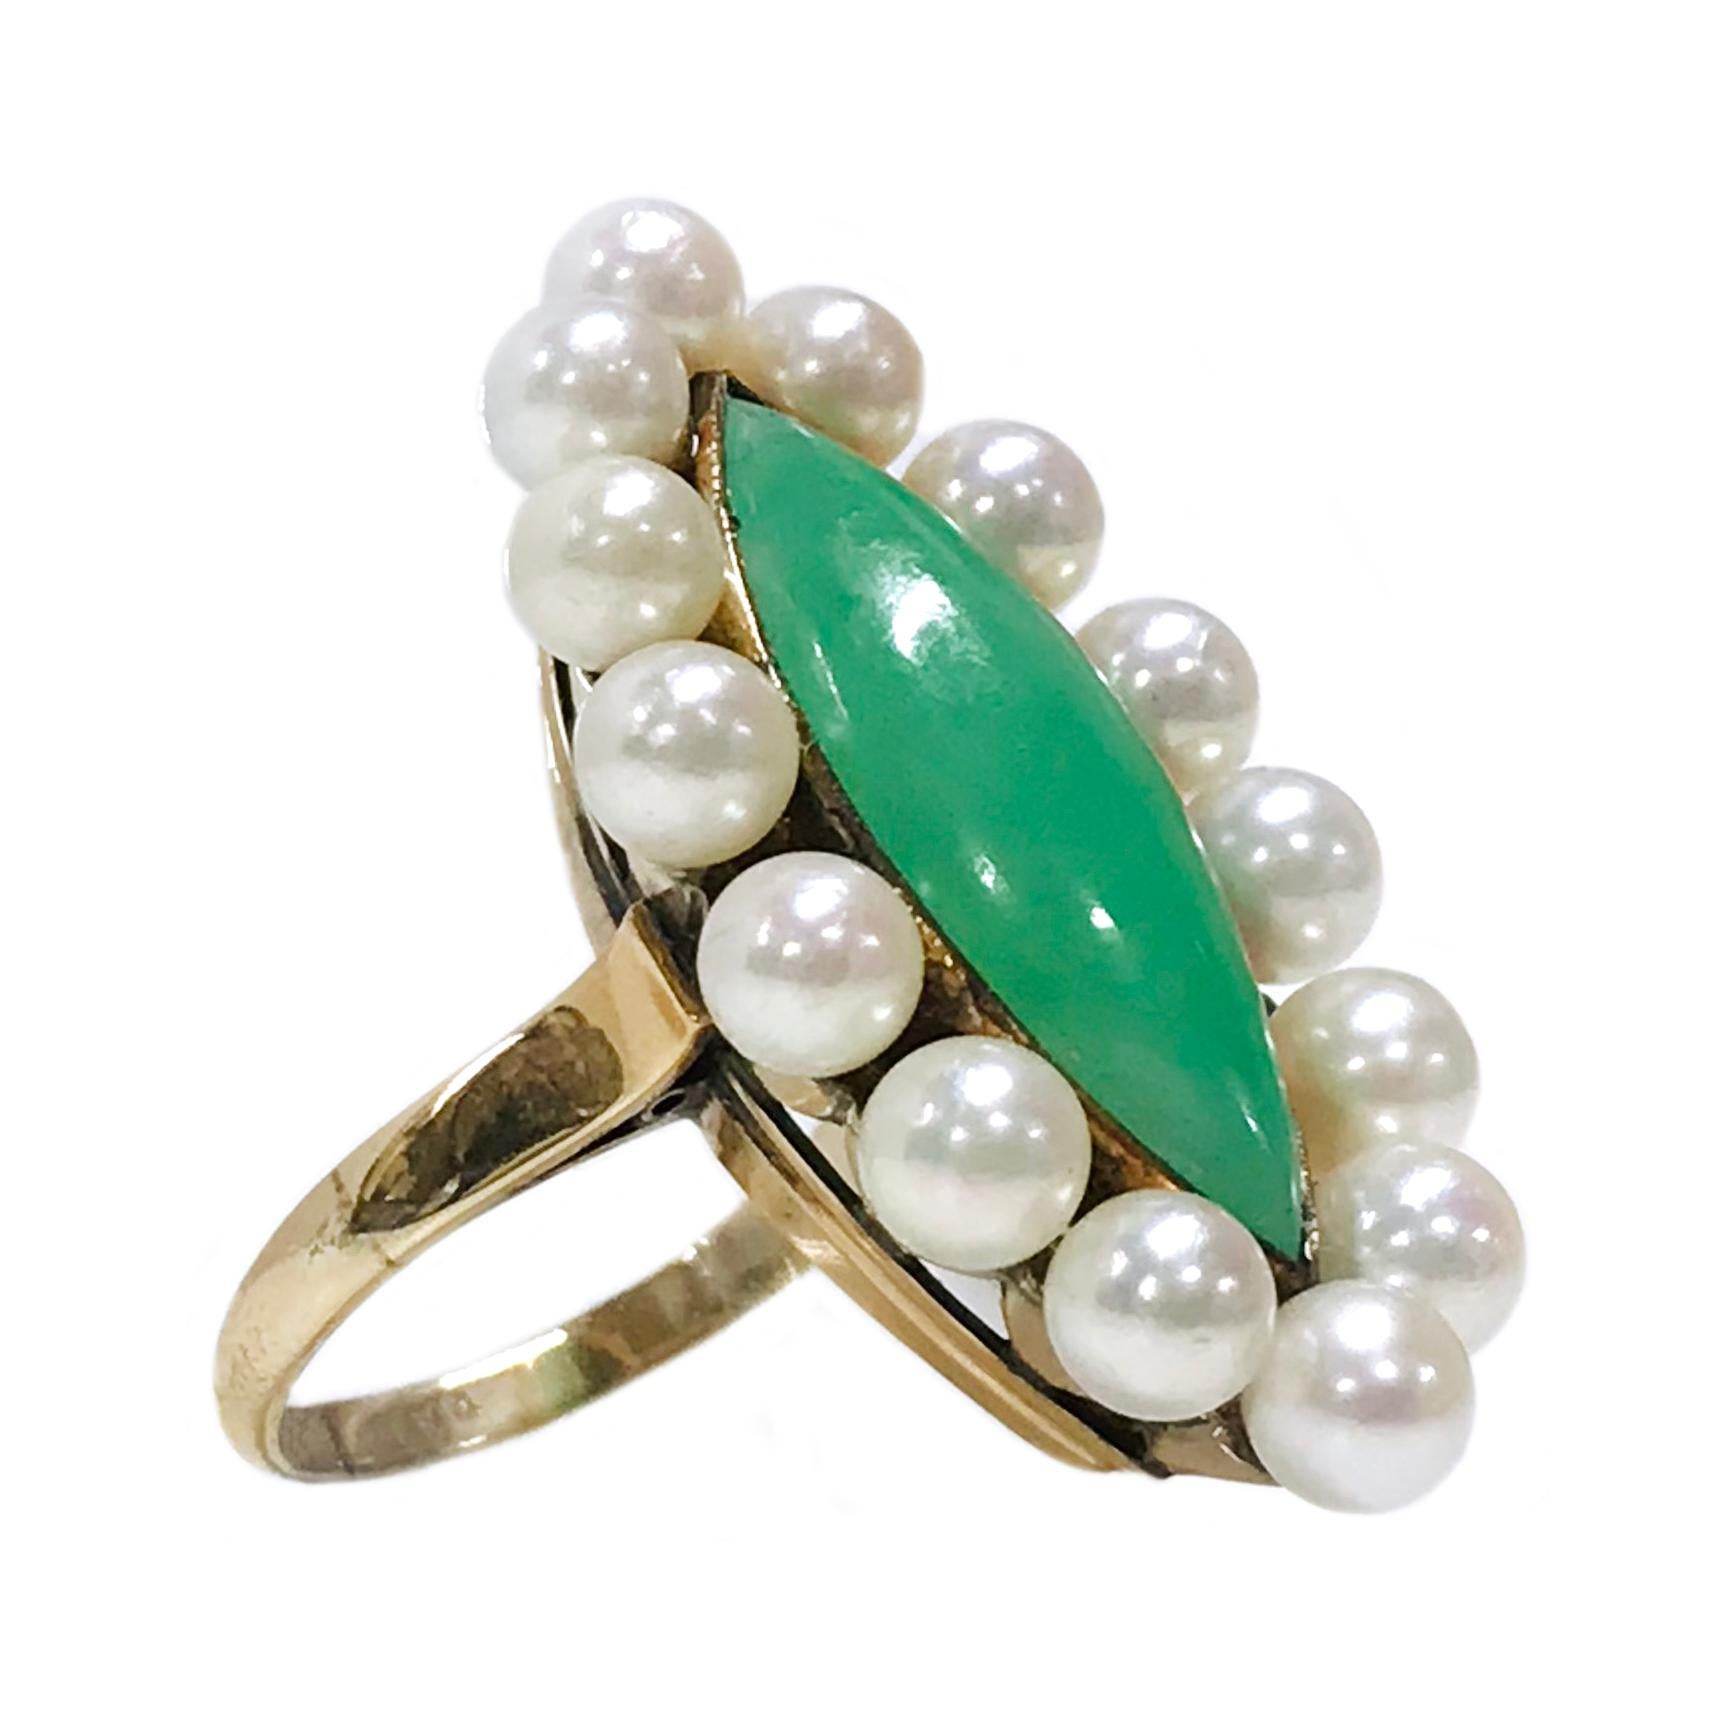 14 Karat Jade Pearl Navette Ring. The ring features a bezel-set green jade cabochon measuring 22 tall x 8.7mm wide. There are fourteen 4.5mm pearls set all around the center bezel. The pearls are creamy-white with good luster. Stamped on the inside